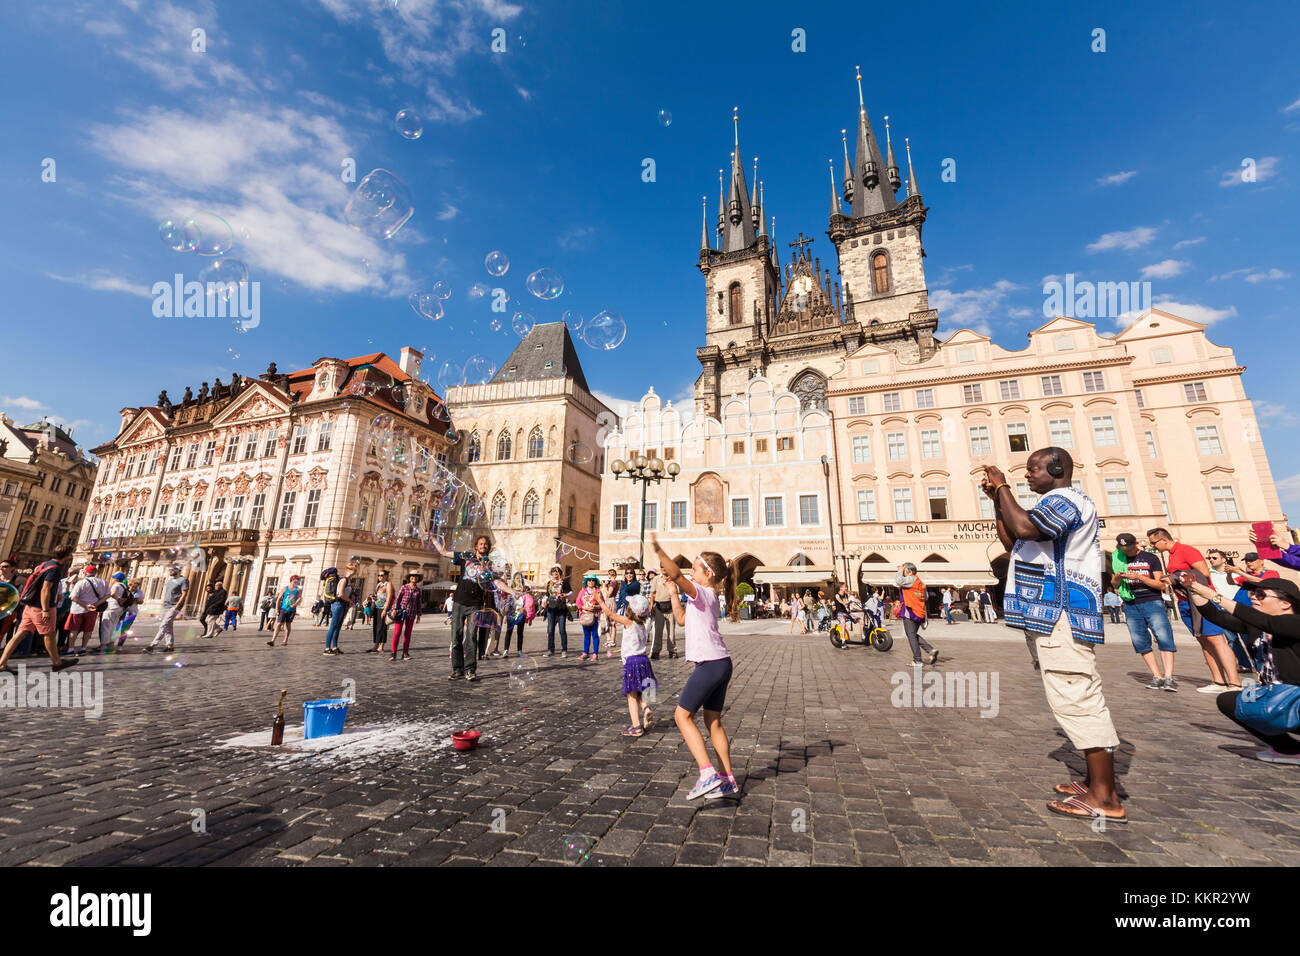 Czechia, Prague, old town, Old Town Square, Church of Our Lady in front of Týn, street artist, giant soap bubbles Stock Photo